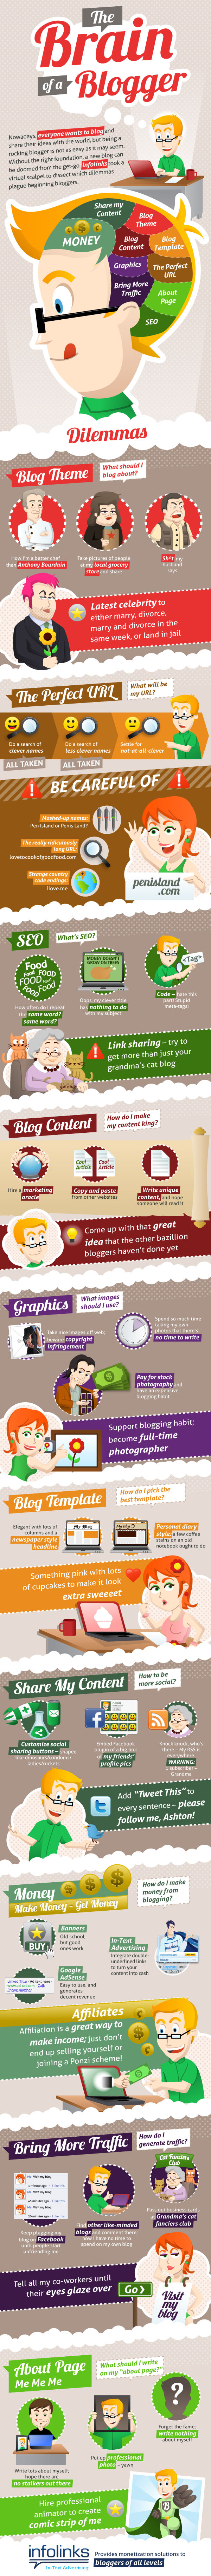 13 Best Tips for Successful Blogging